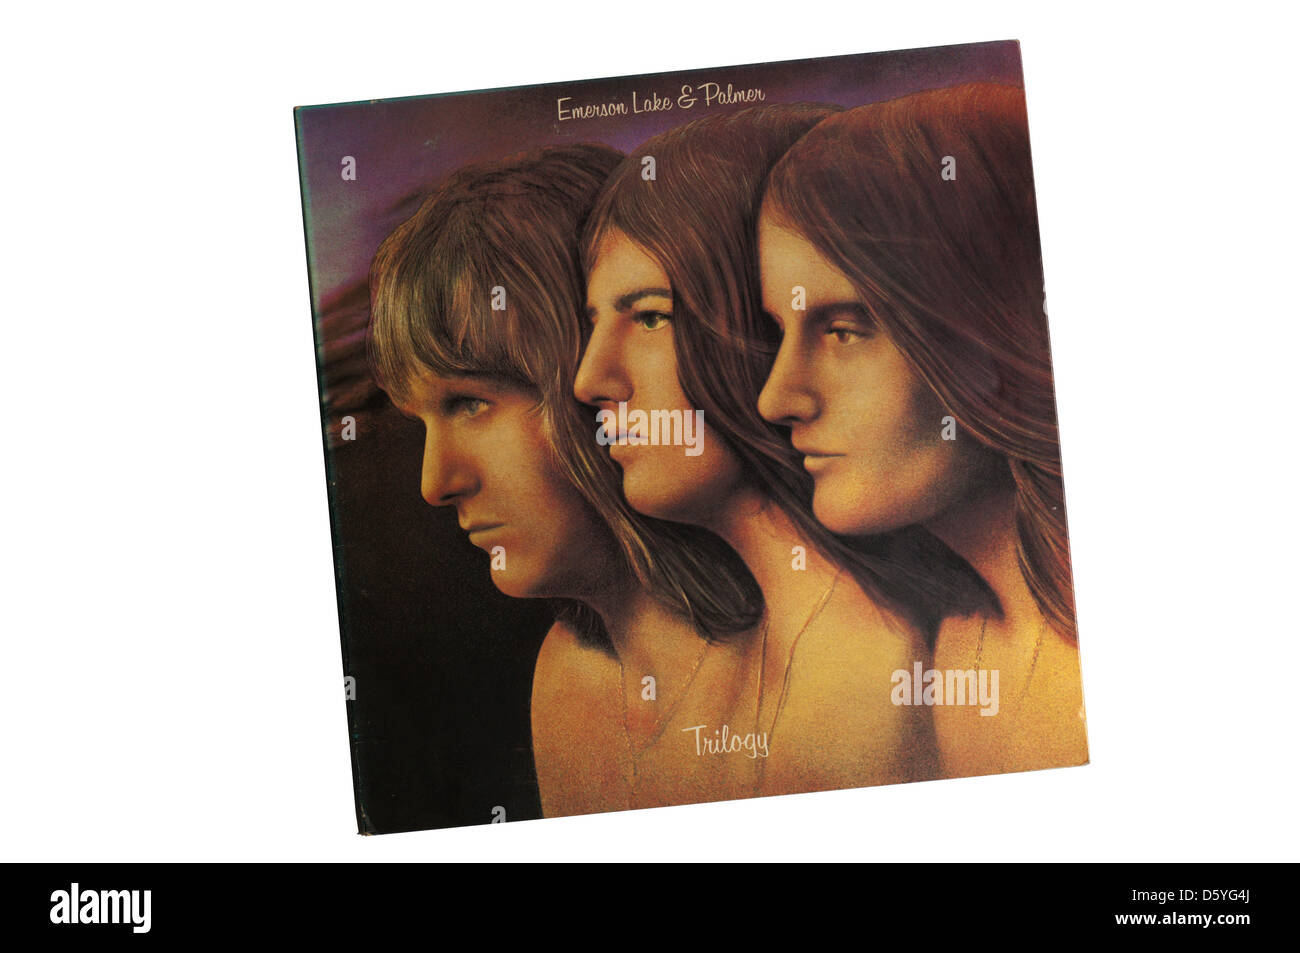 Trilogy was the 3rd studio album by the English progressive rock band Emerson, Lake & Palmer, released in 1972 Stock Photo